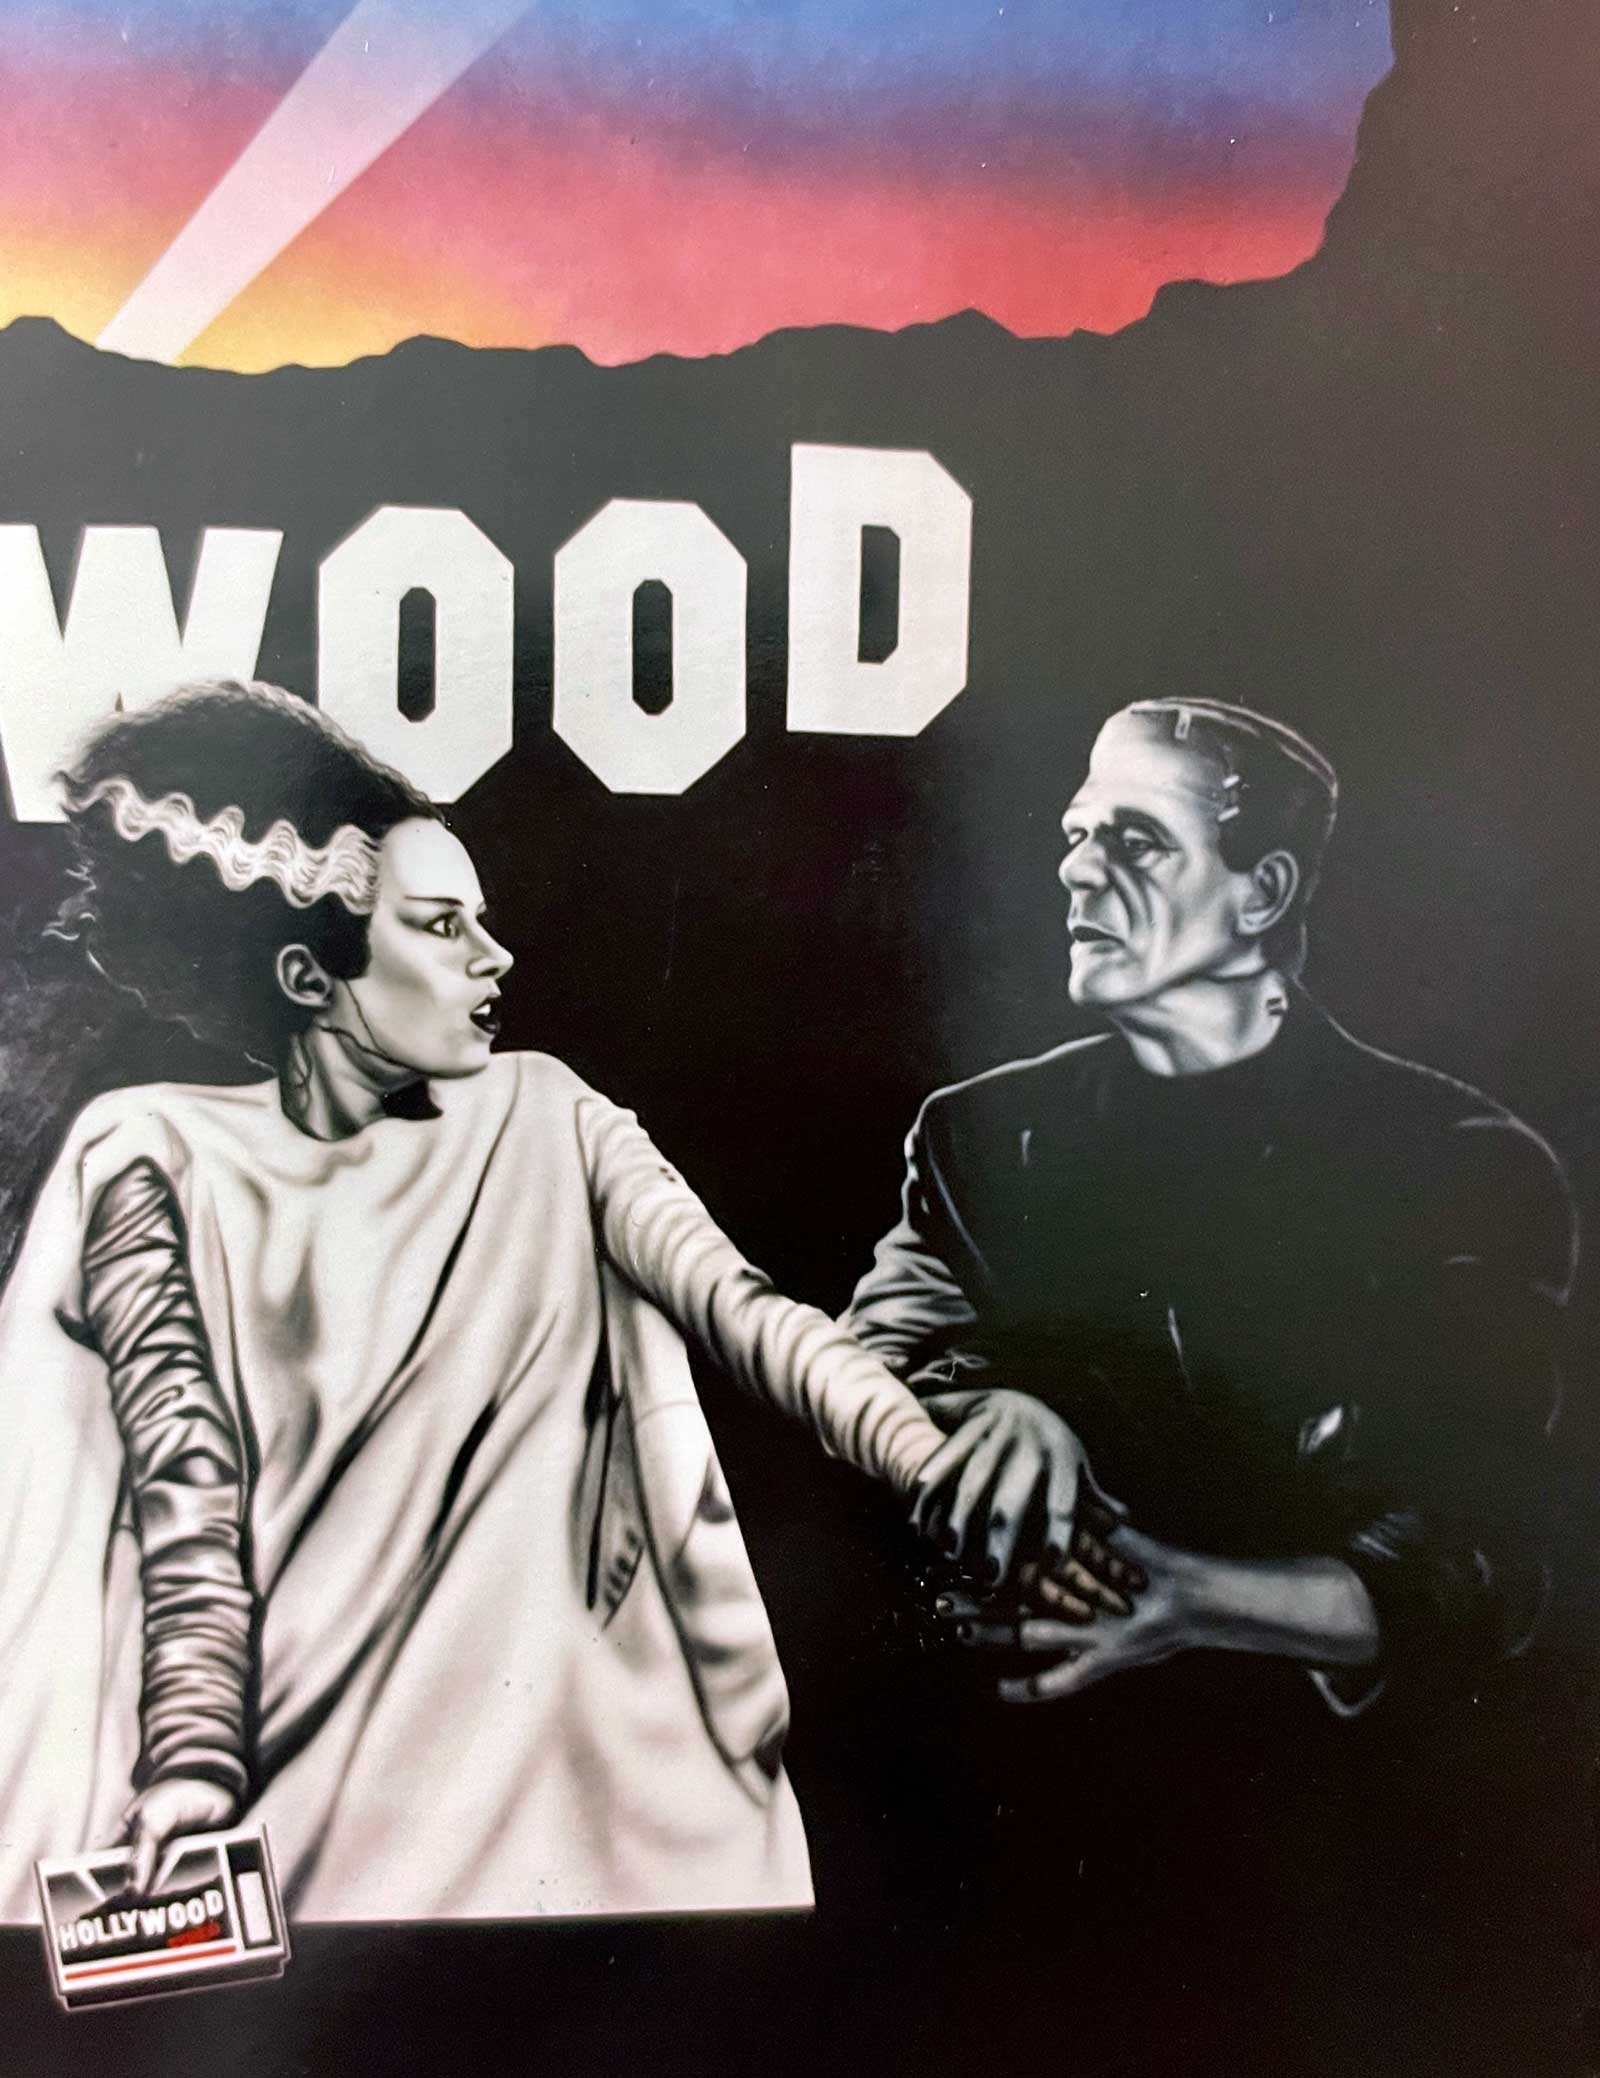 The Bride of Frankenstein mural by A.D. Cook, 1989